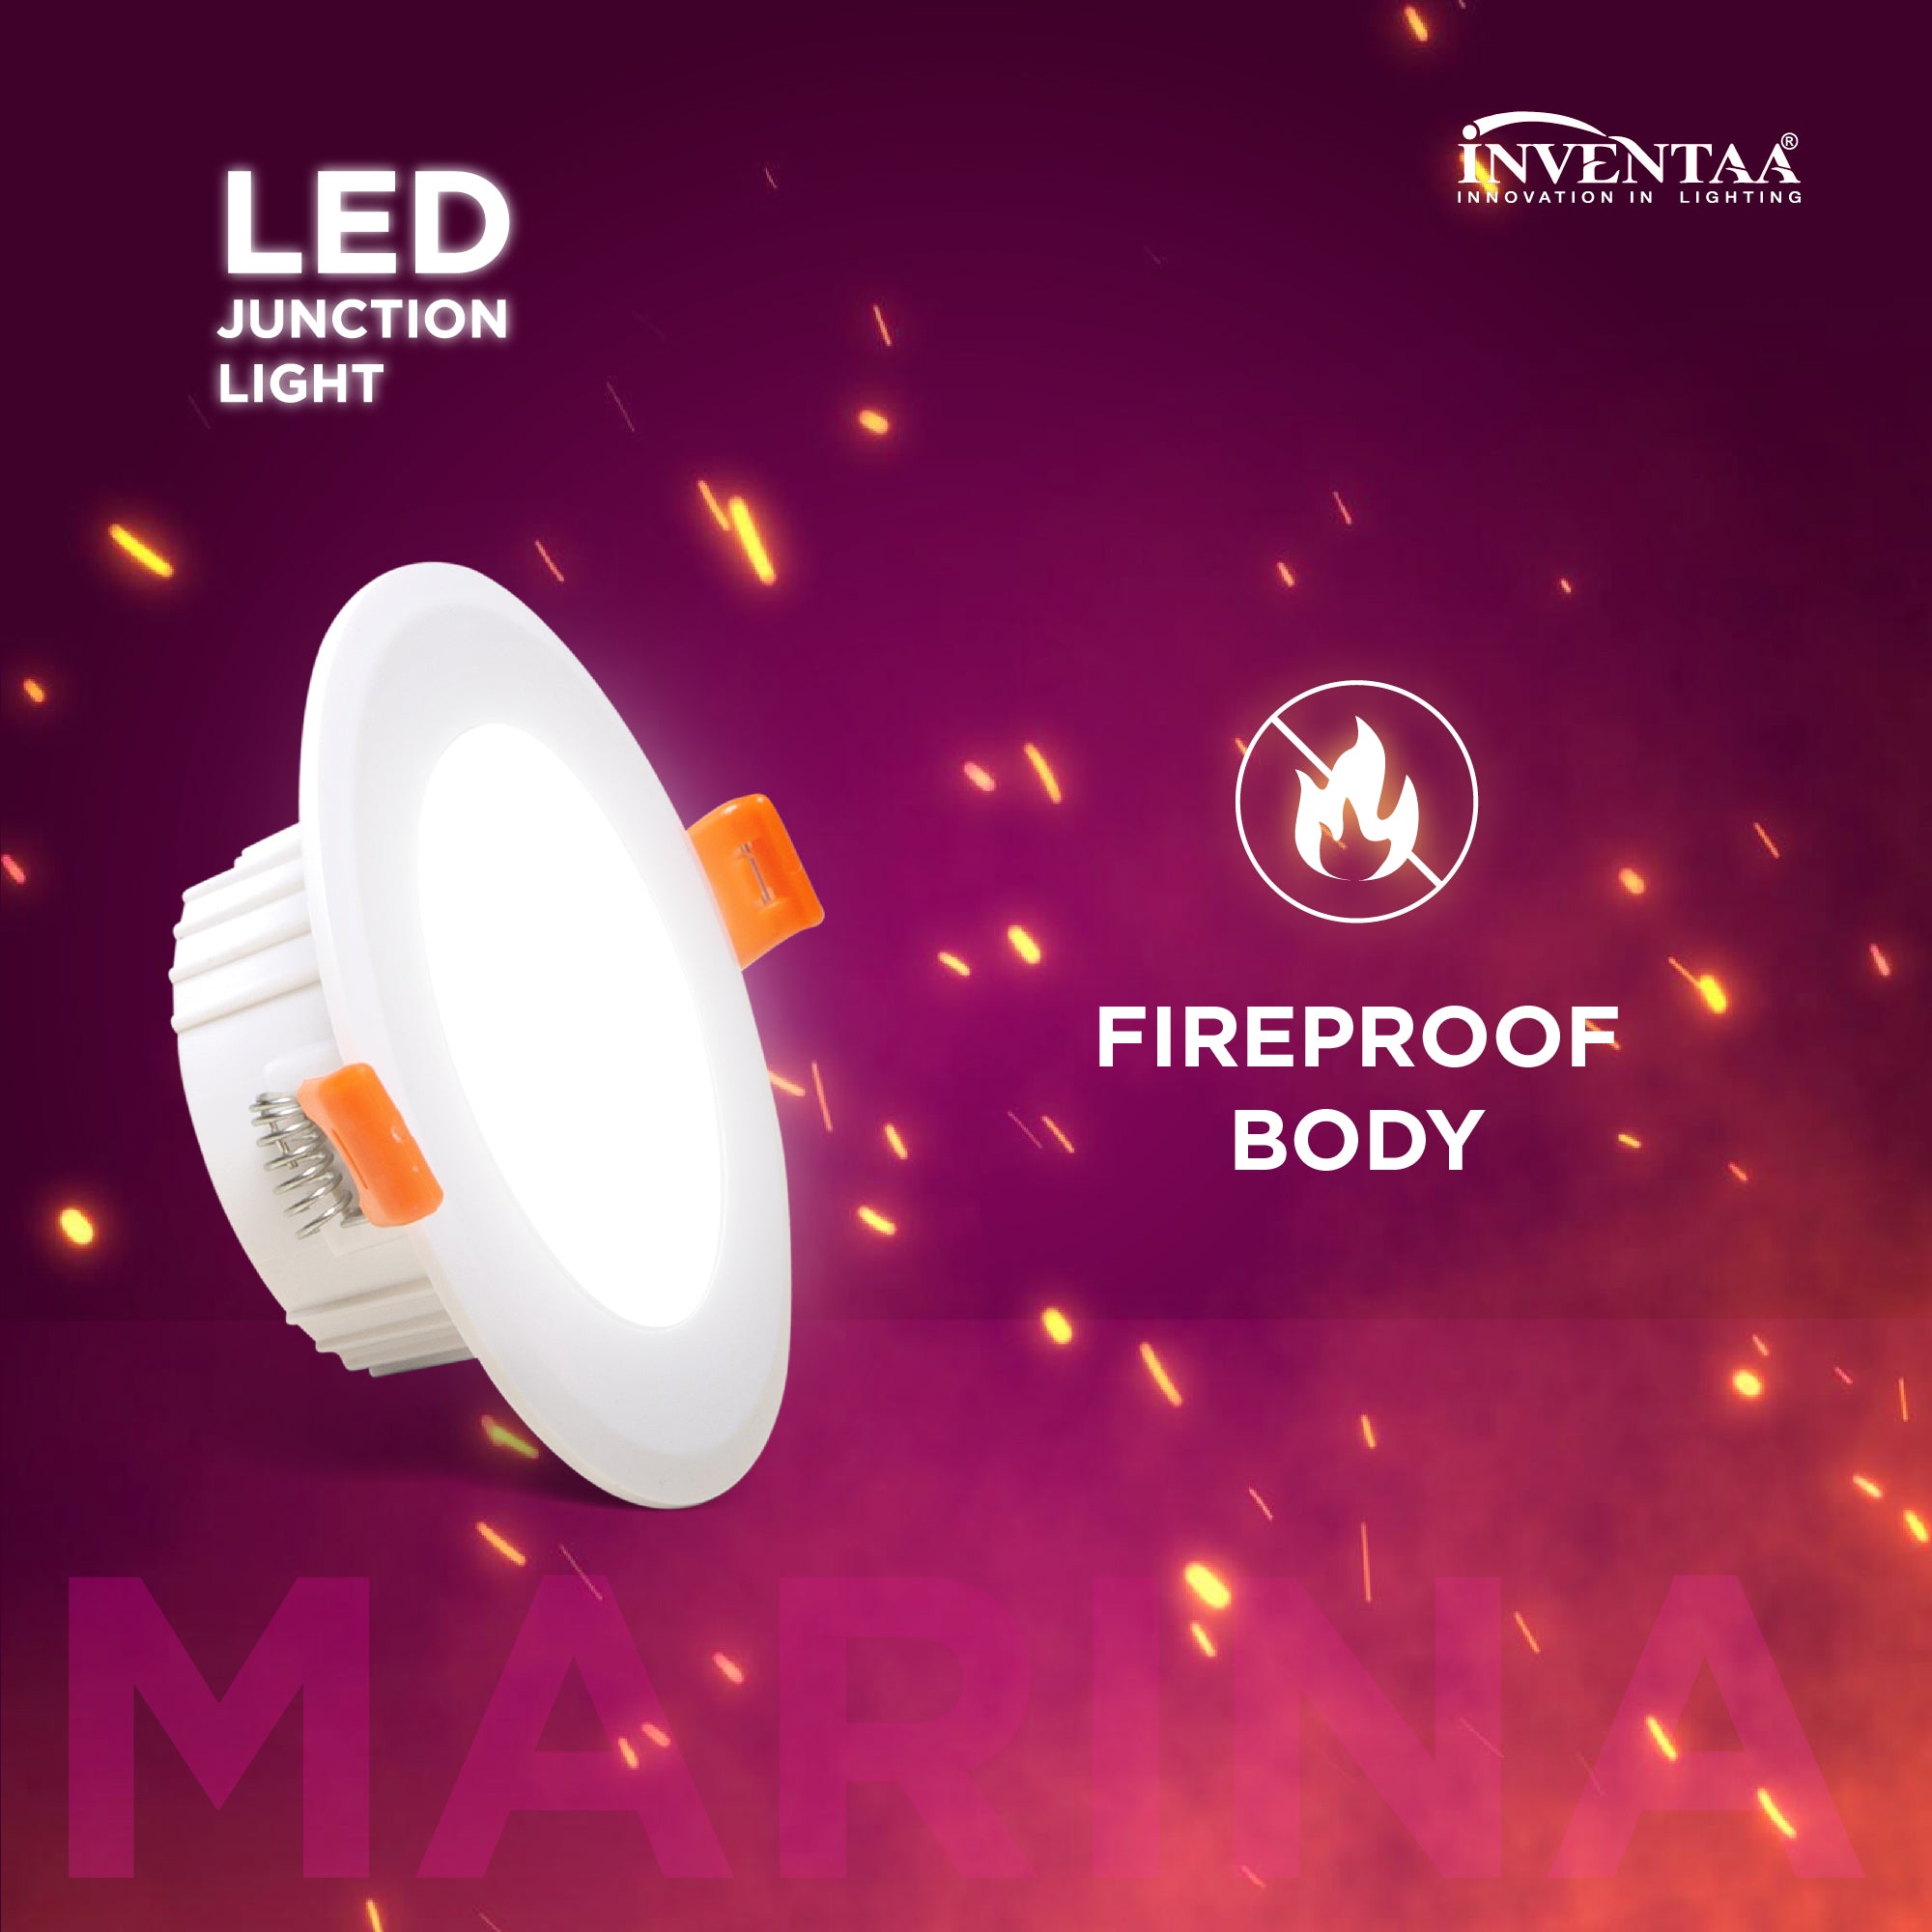 Marina 8W LED Junction Light Featuring Its Fireproof Resistance #Suitable For_3 inch Deep Junction Box